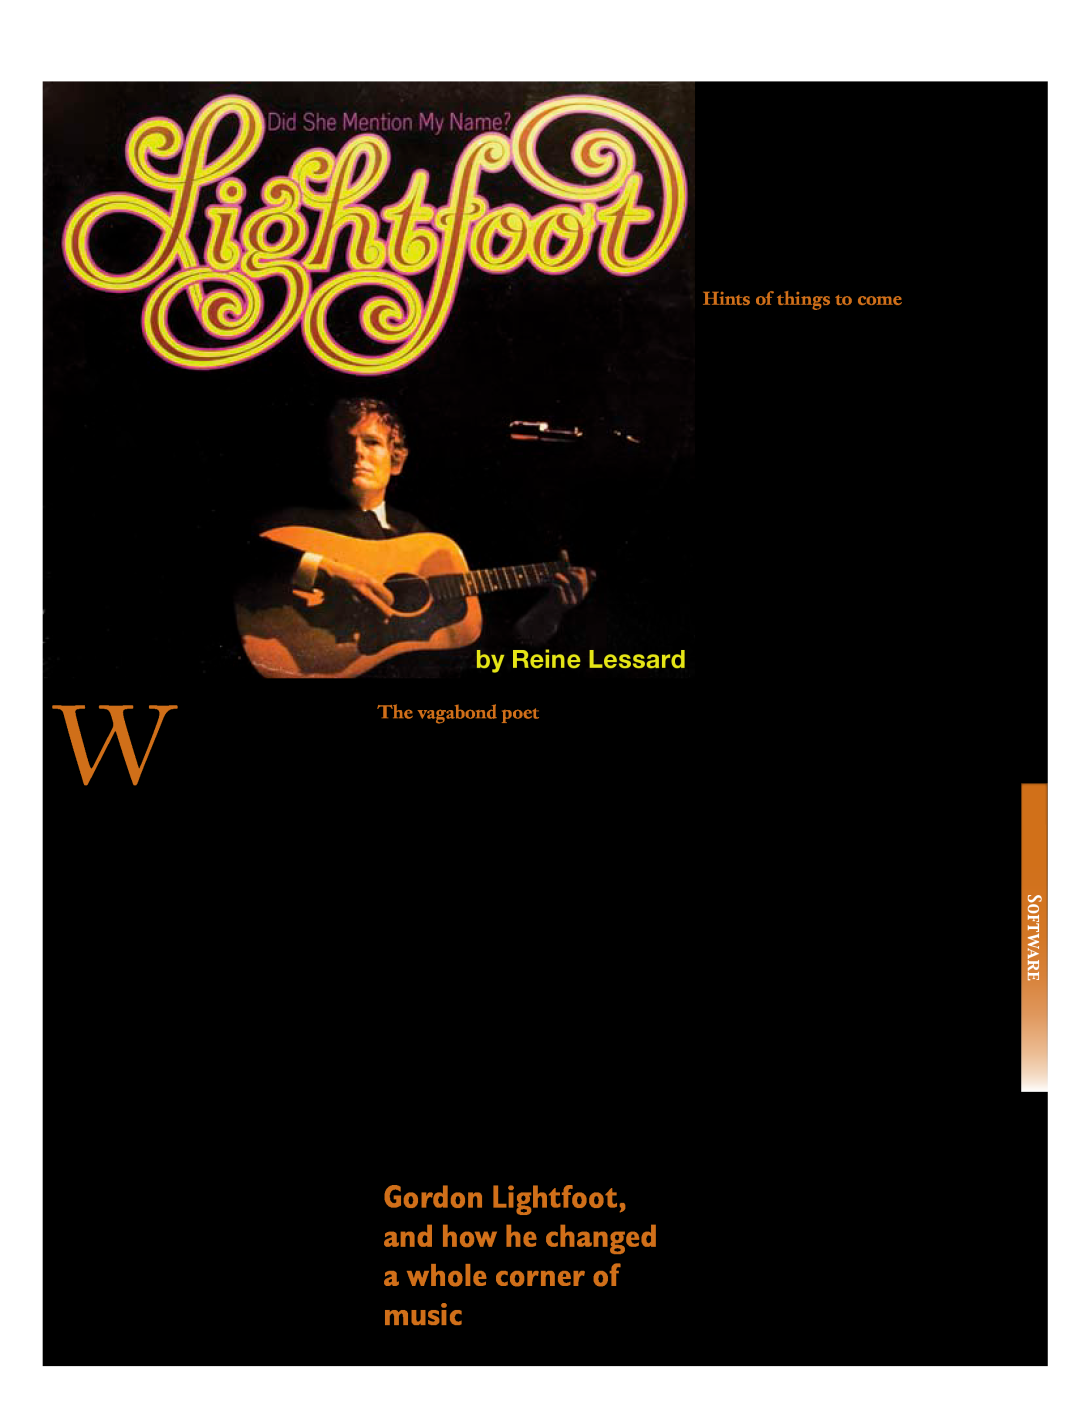 Koss 76 manual Gordon Lightfoot, and how he changed a whole corner of music, by Reine Lessard, The vagabond poet 